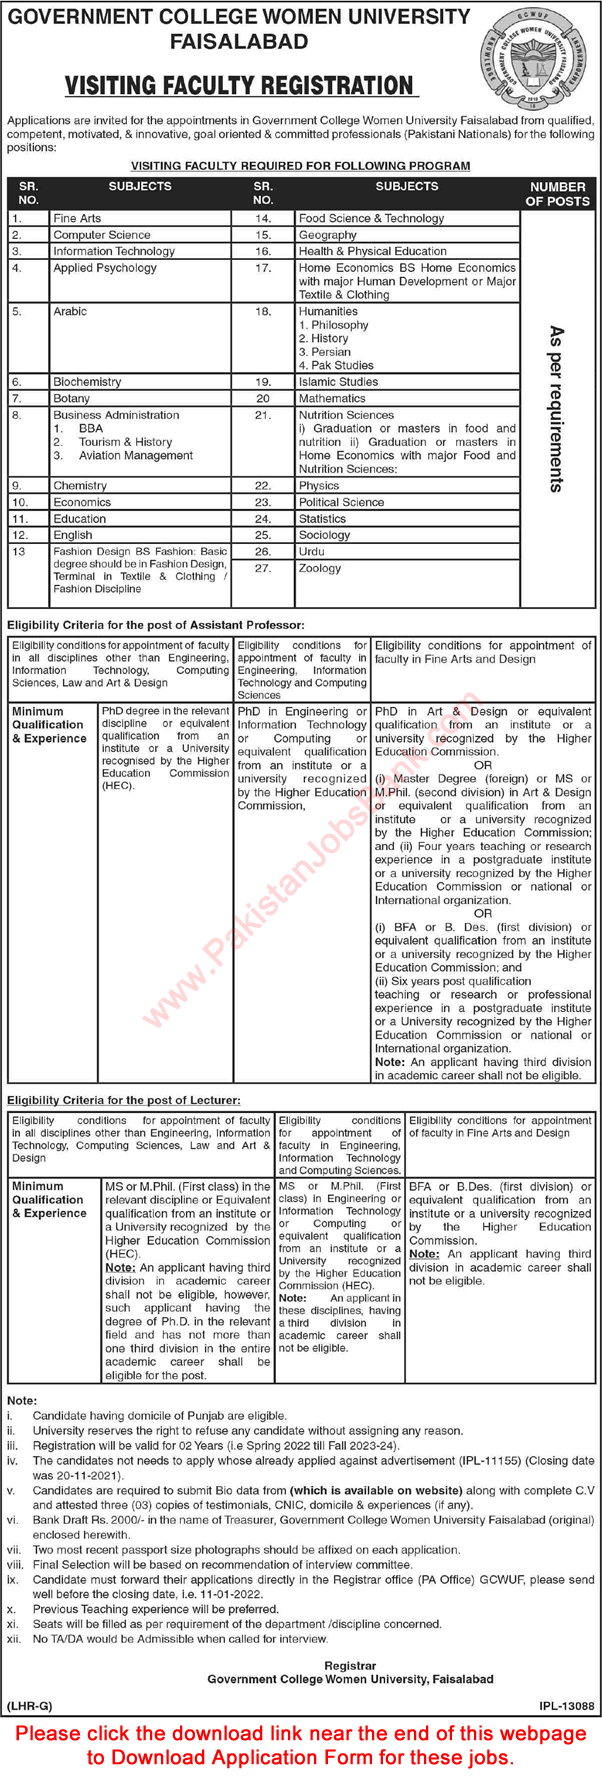 Visiting Faculty Jobs in Government College Women University Faisalabad December 2021 GCWUF Application Form Latest